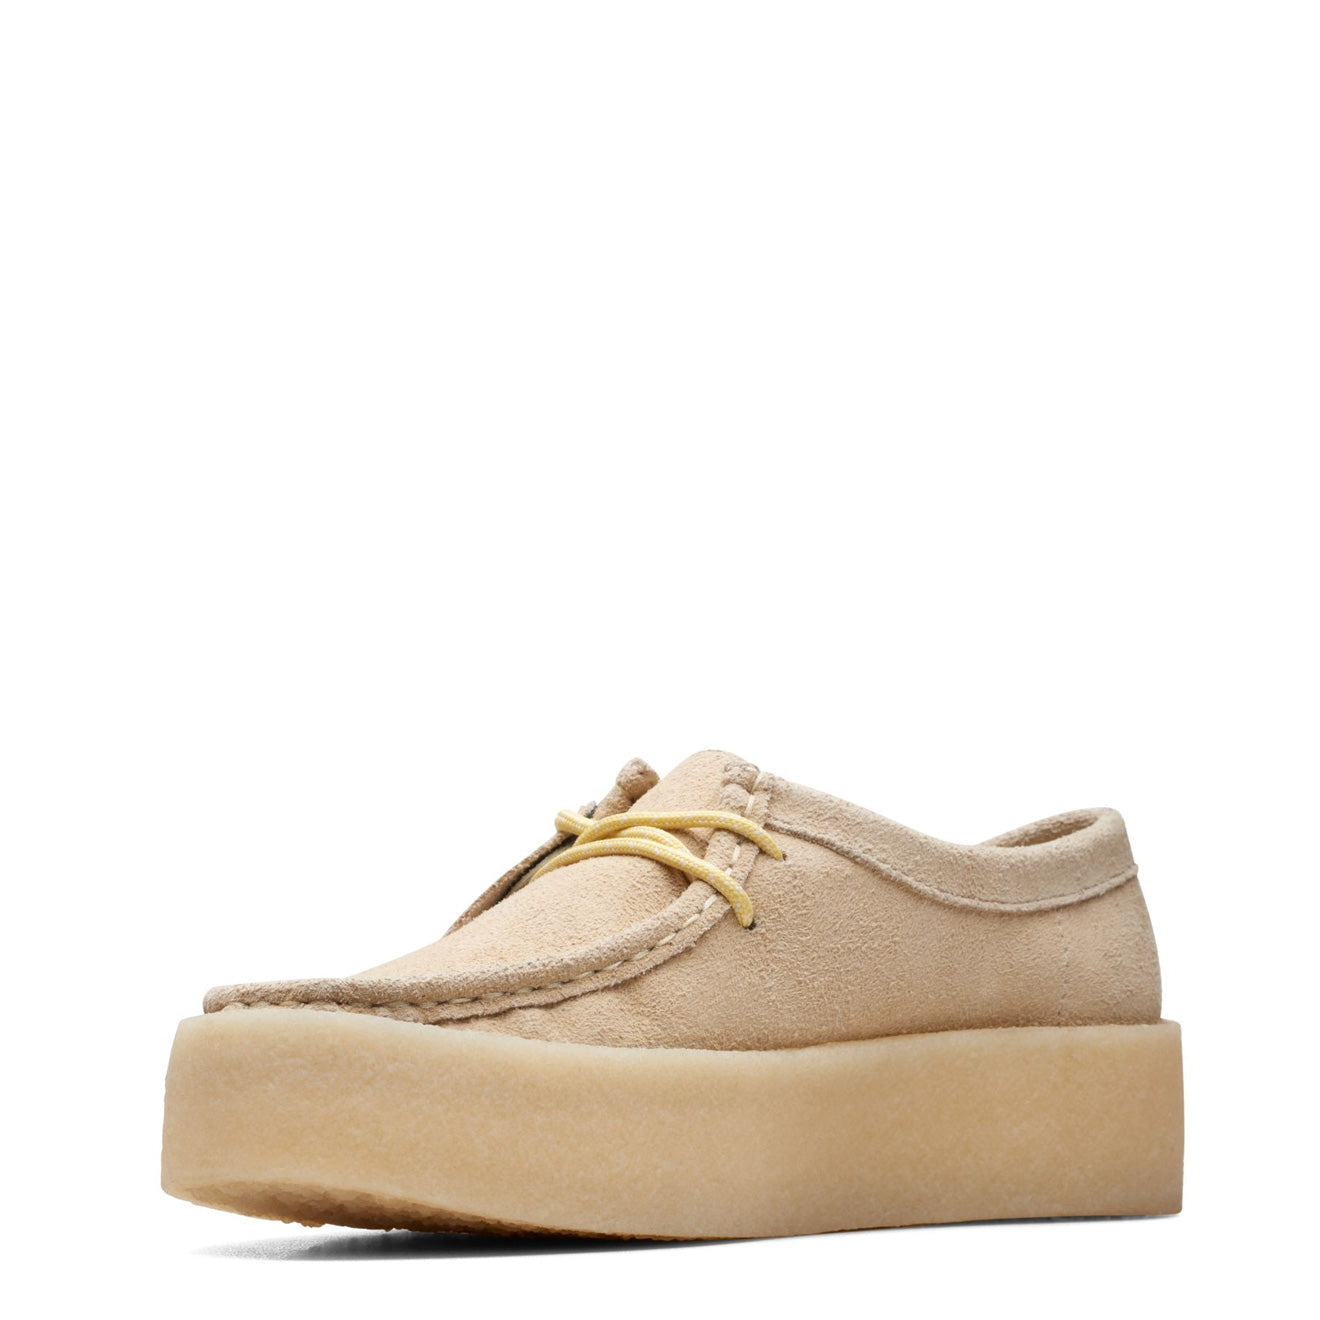 Clarks Originals Womens Wallabee Cup Shoe Maple | The Sporting Lodge